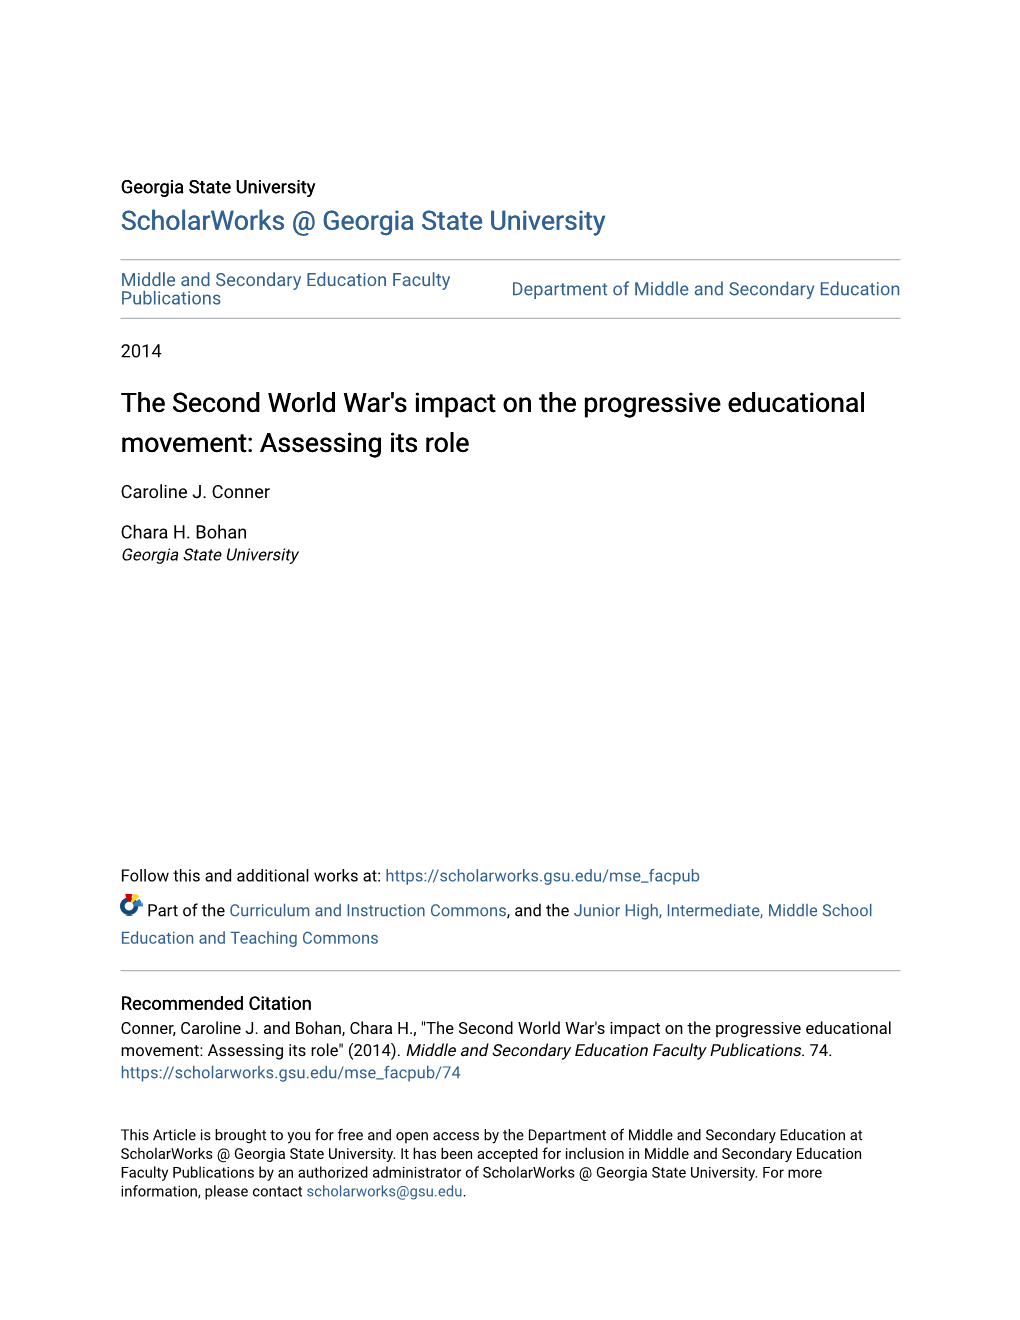 The Second World War's Impact on the Progressive Educational Movement: Assessing Its Role